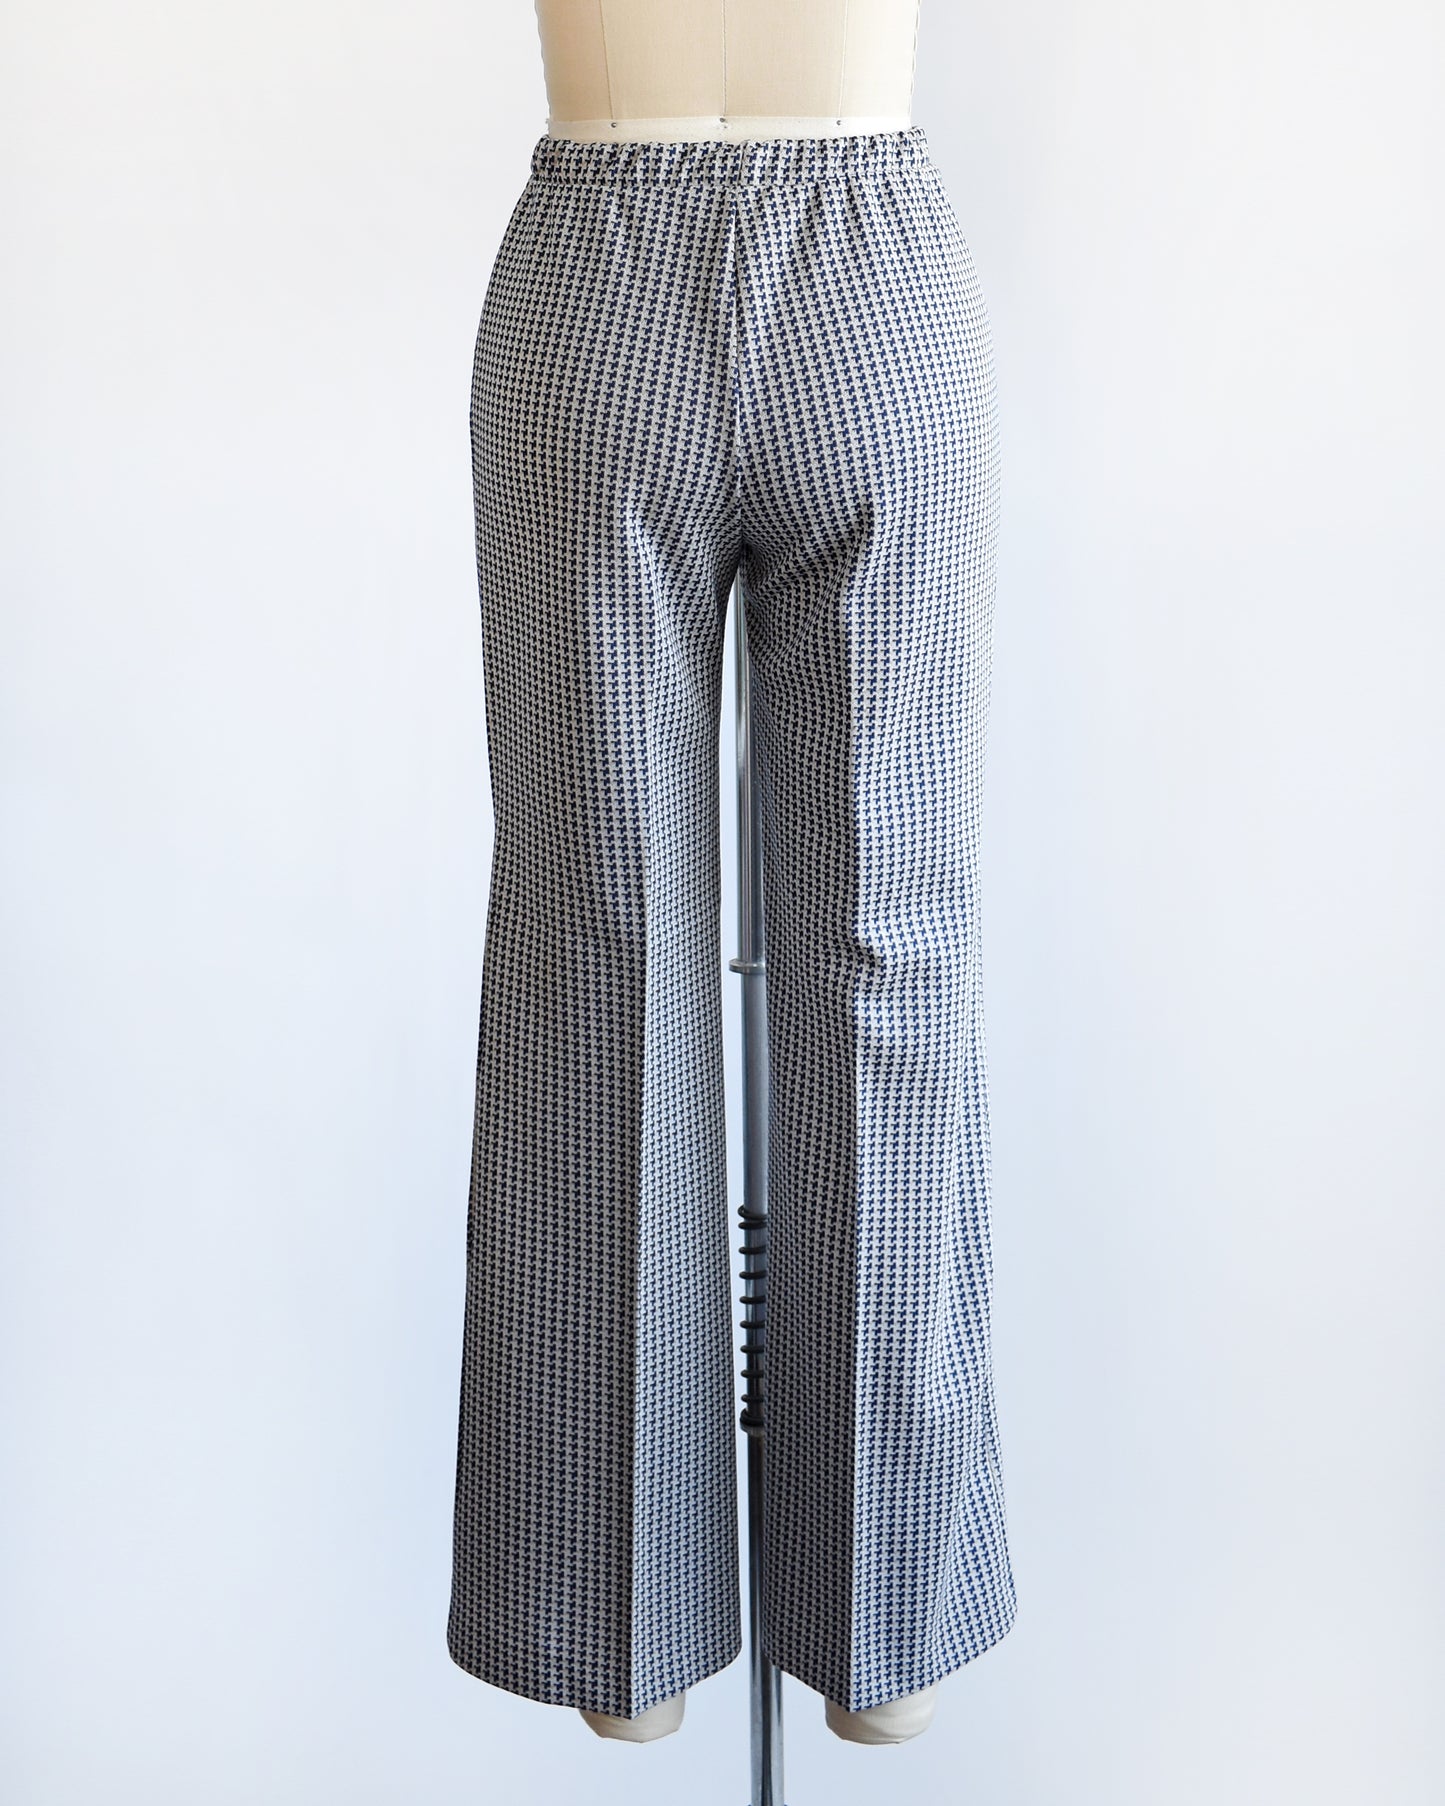 back view of a pair of vintage 1970s wide leg pants with houndstooth print